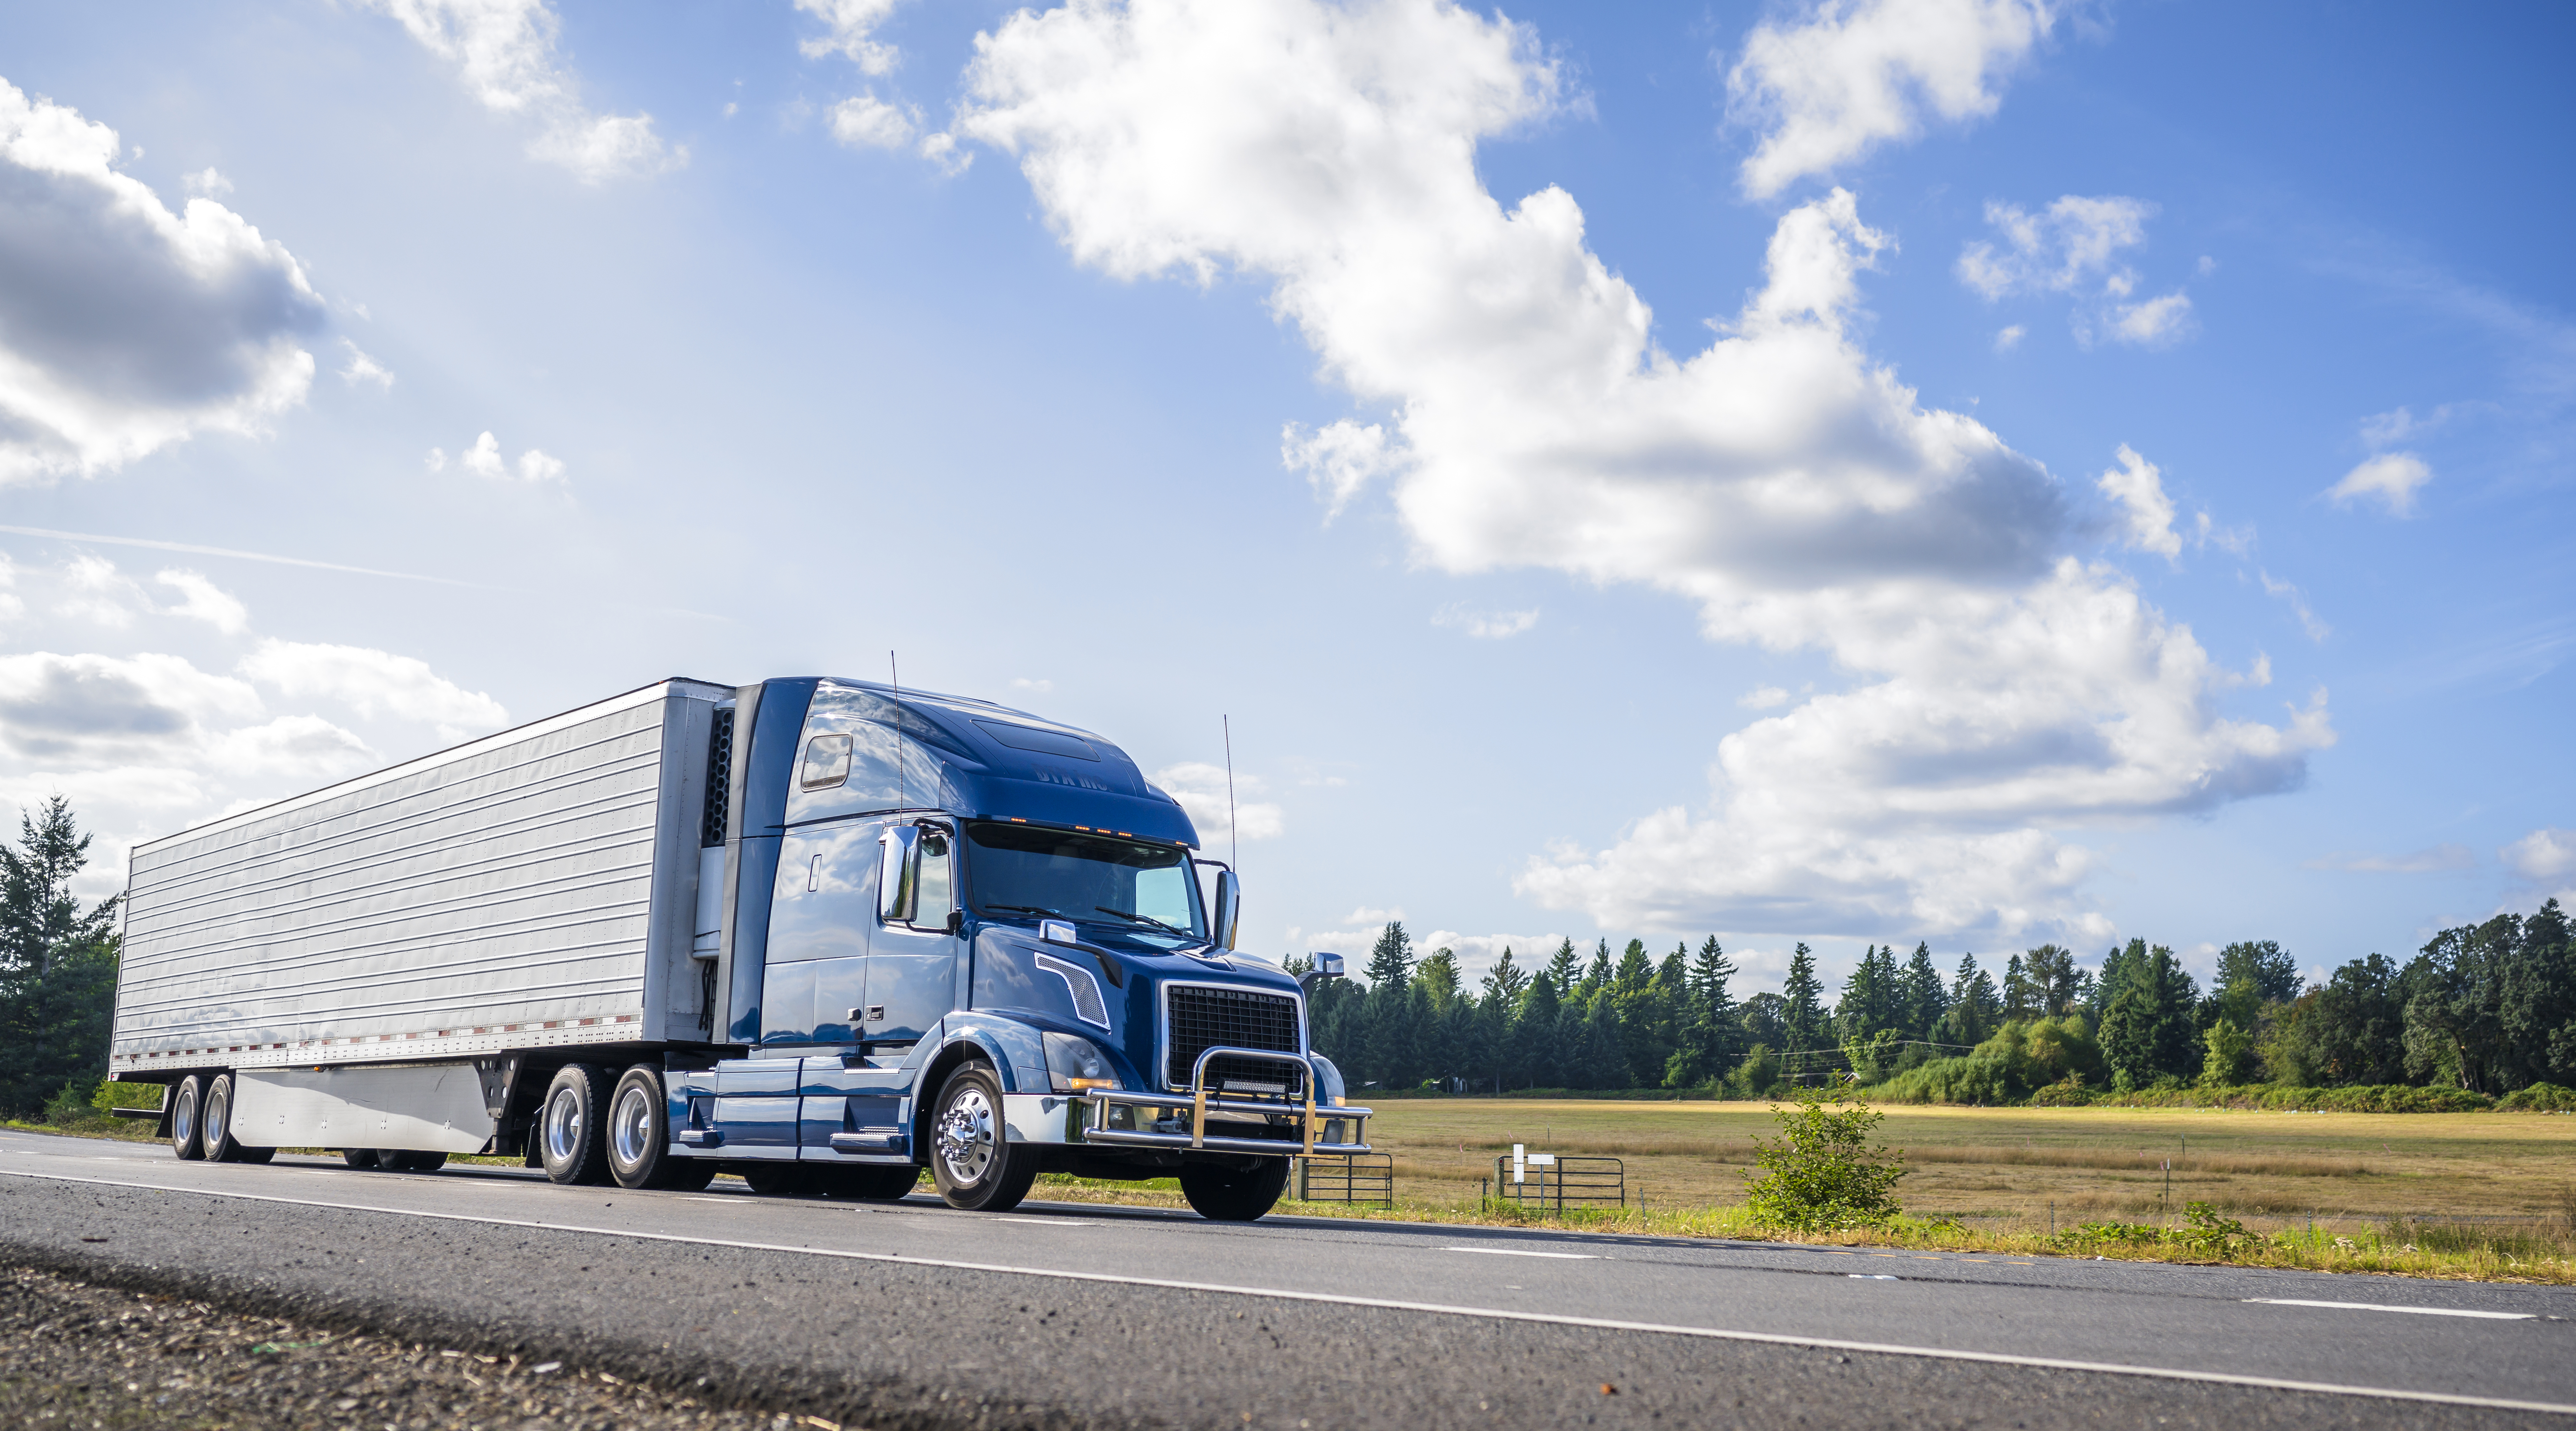 10 Largest Trucking Companies in the U.S.